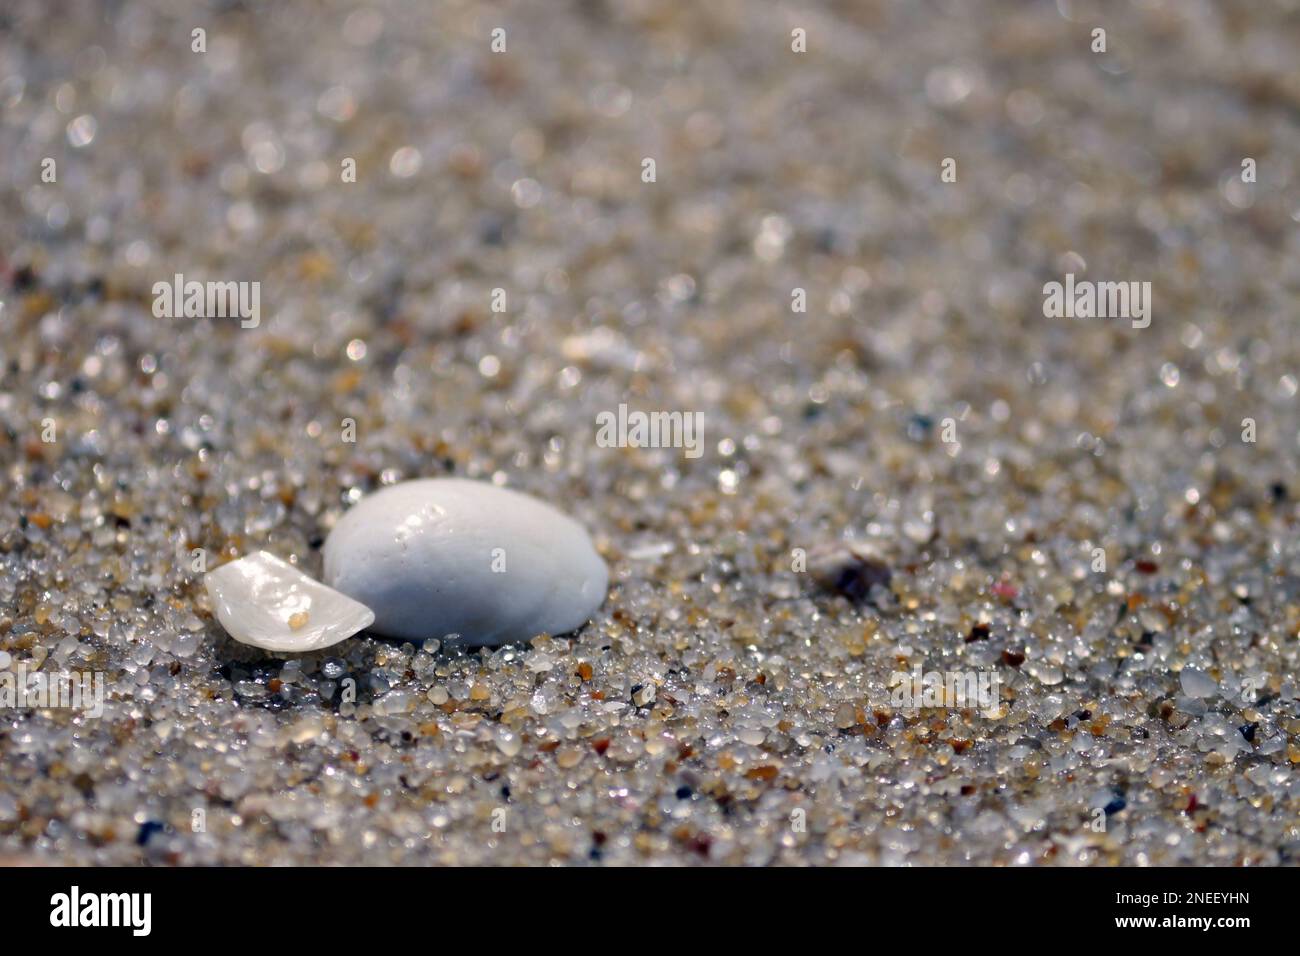 Sea shells. Arriving with the waves on the sand of the beach, the shells form a magnificent landscape of their shapes and fittings. Stock Photo